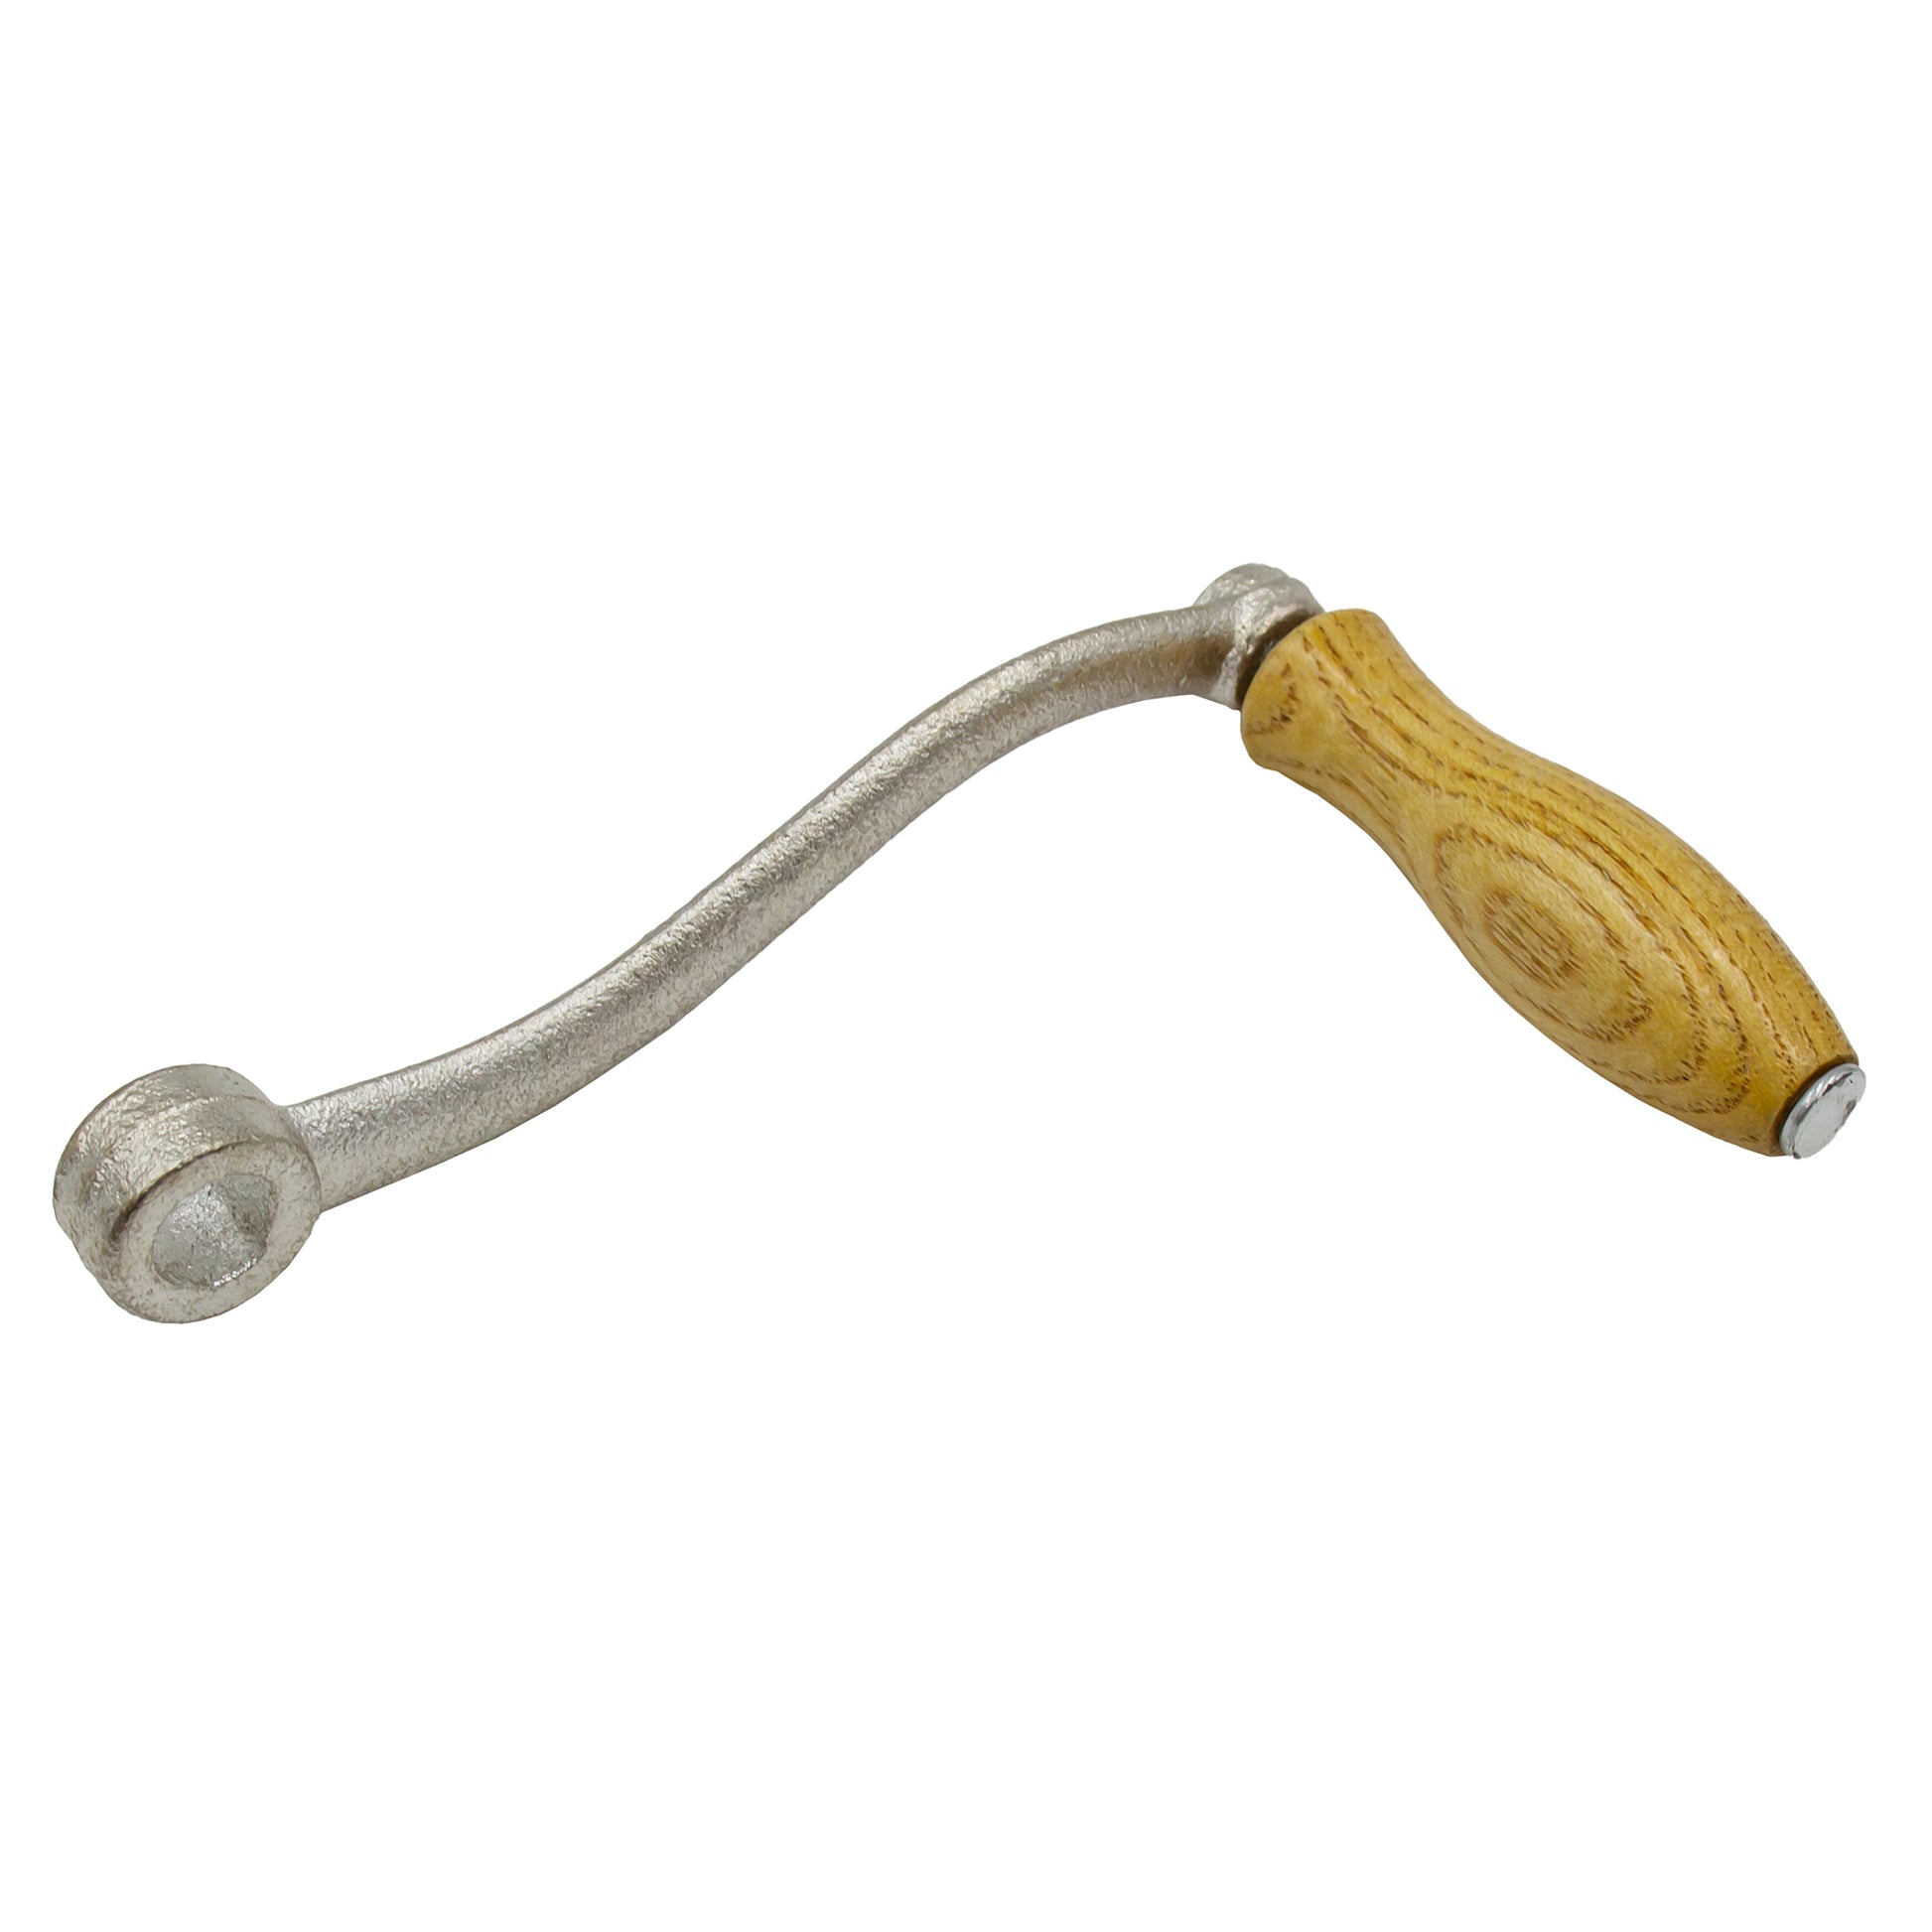 Sturdy handle with wooden grip